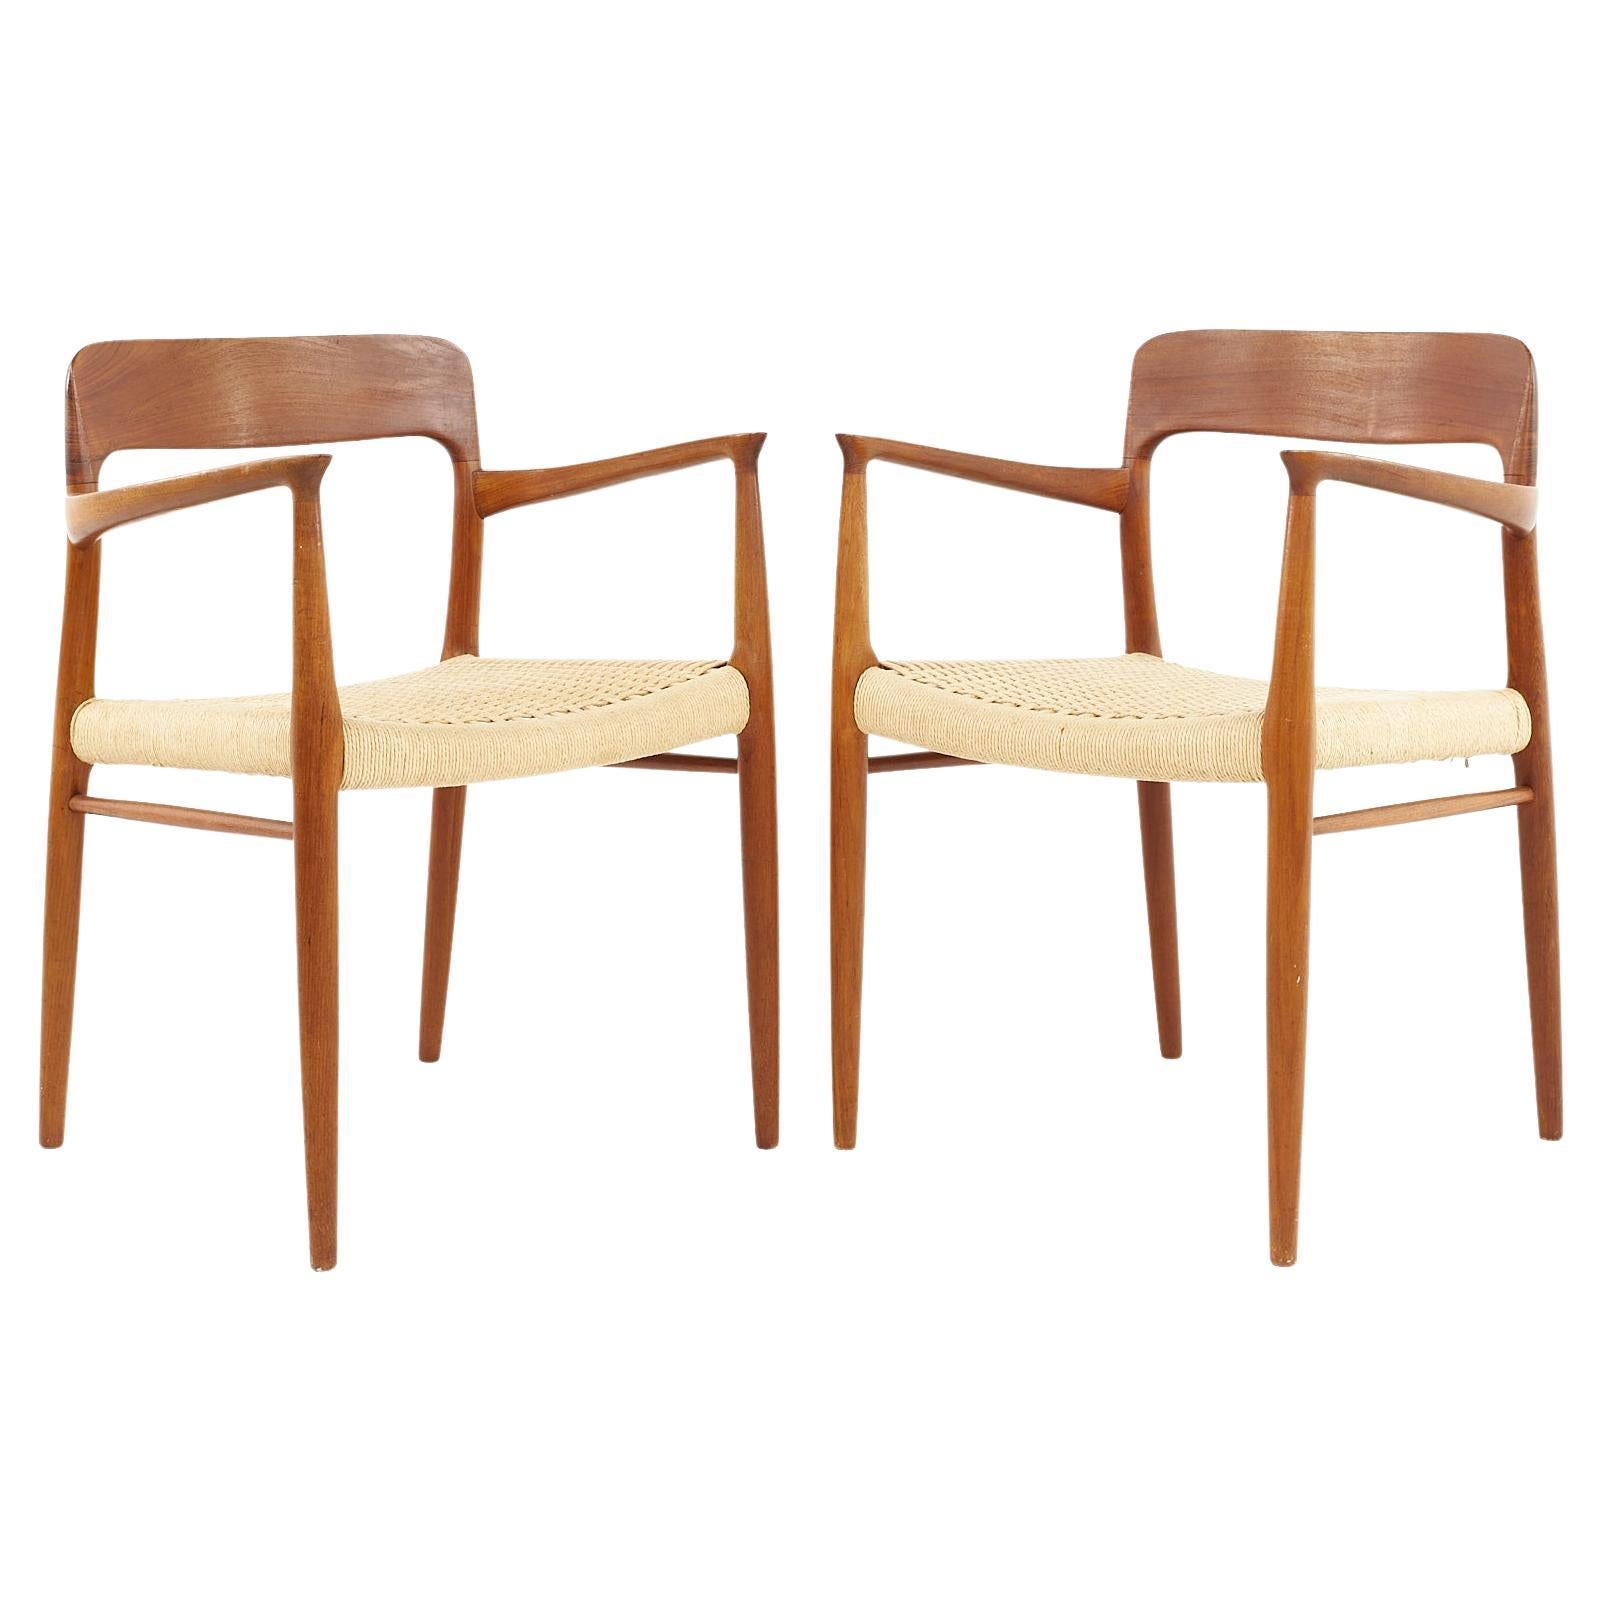 Niels Moller Model 77 Mid Century Teak Dining Armchairs, a Pair For Sale